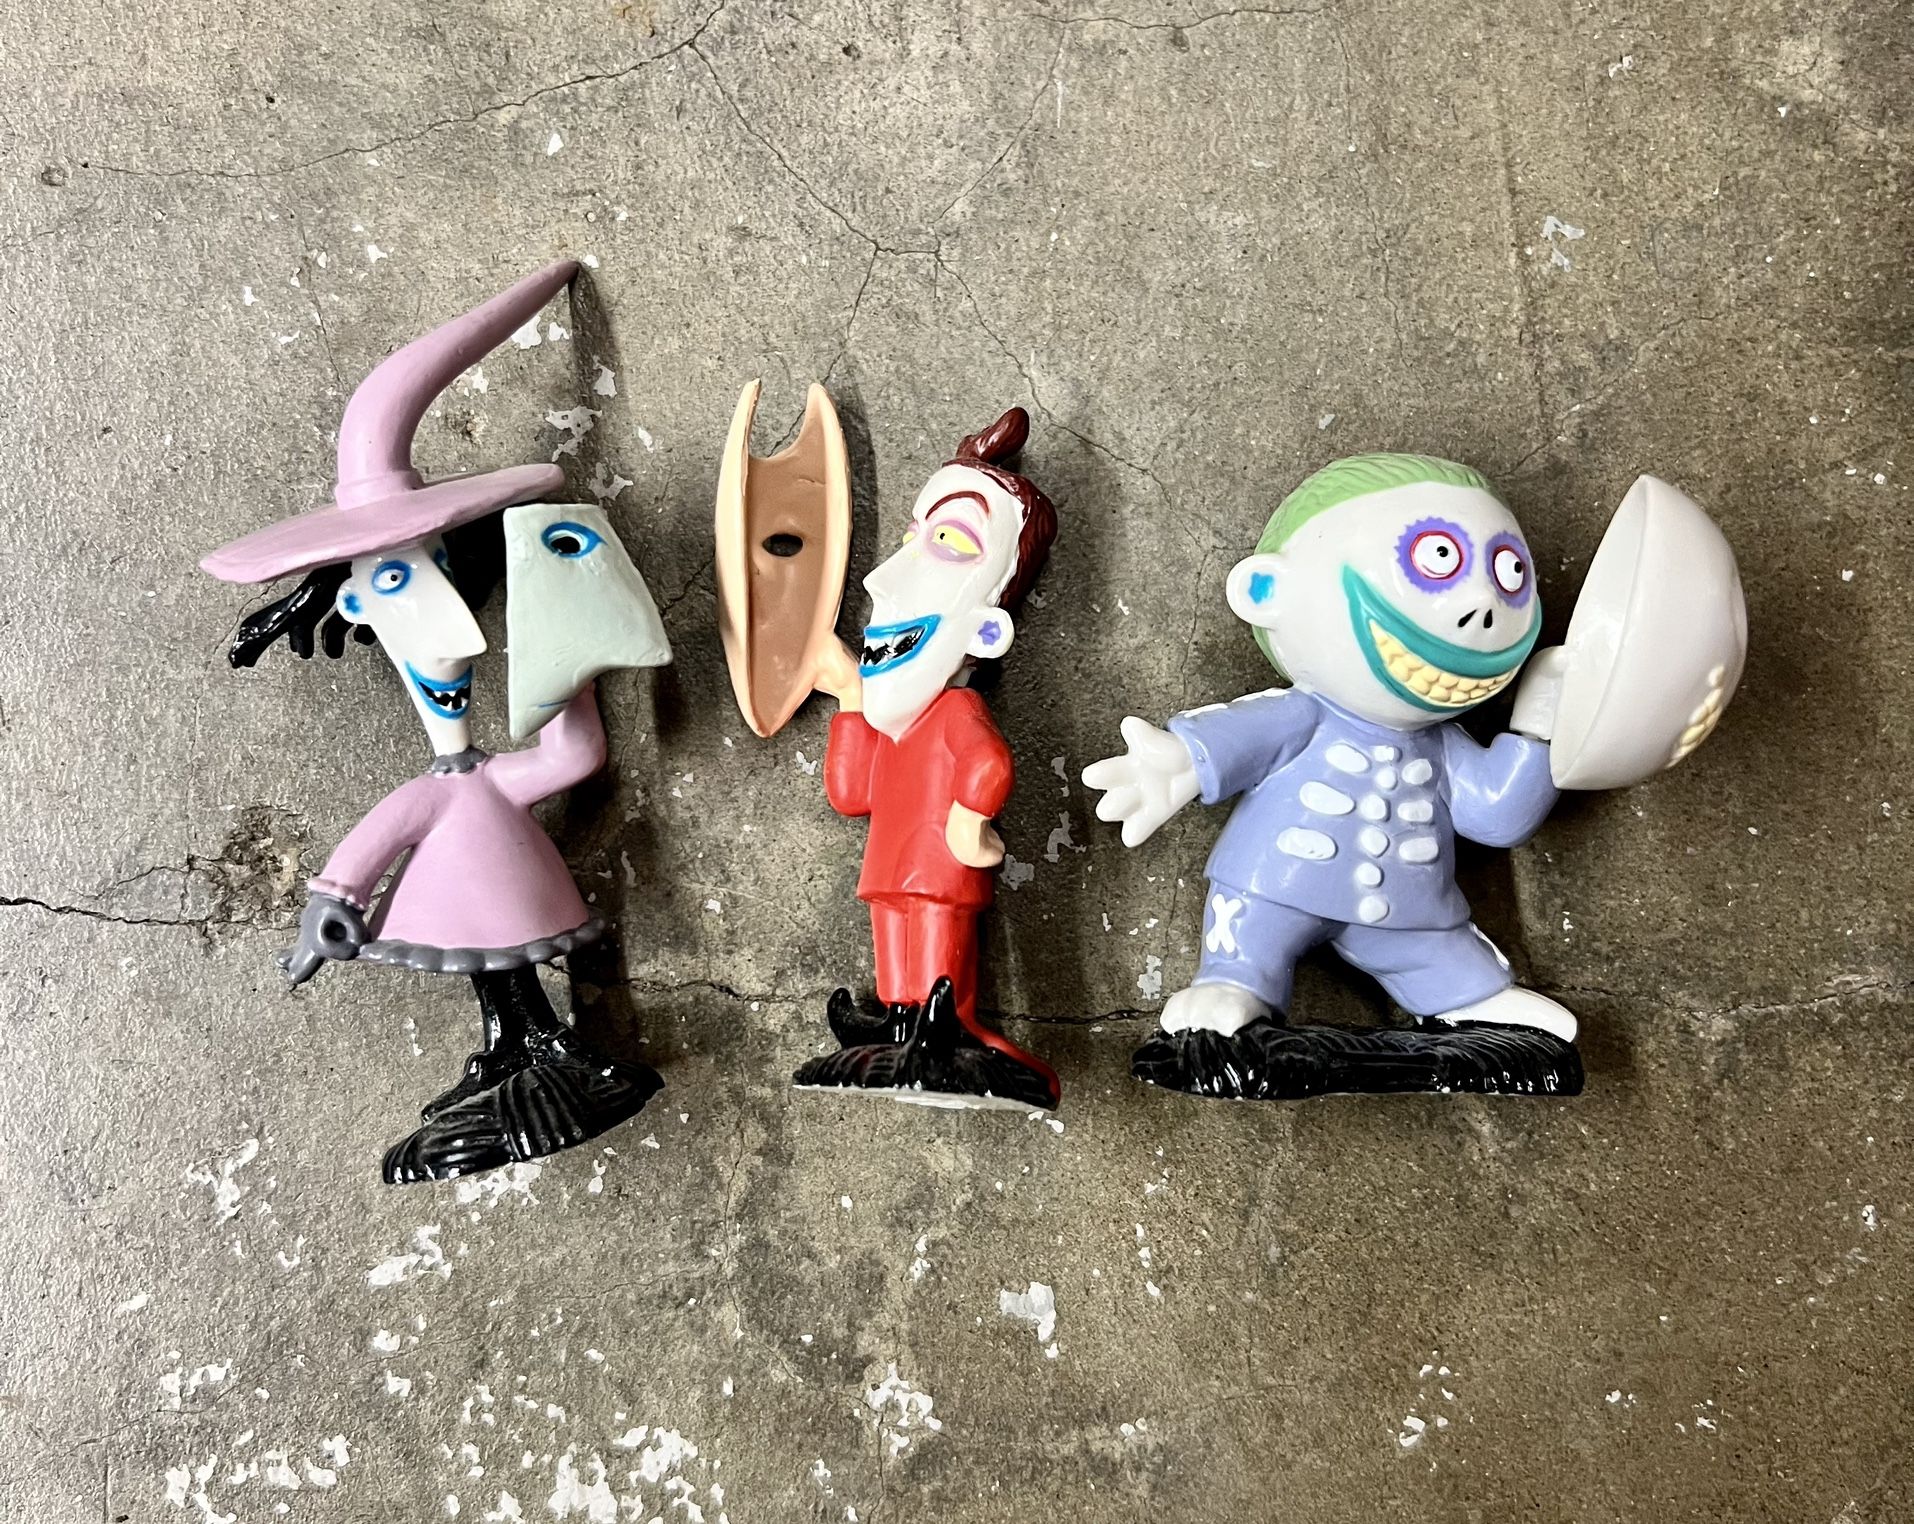 Nightmare Before Christmas Figurines With Removable Masks 